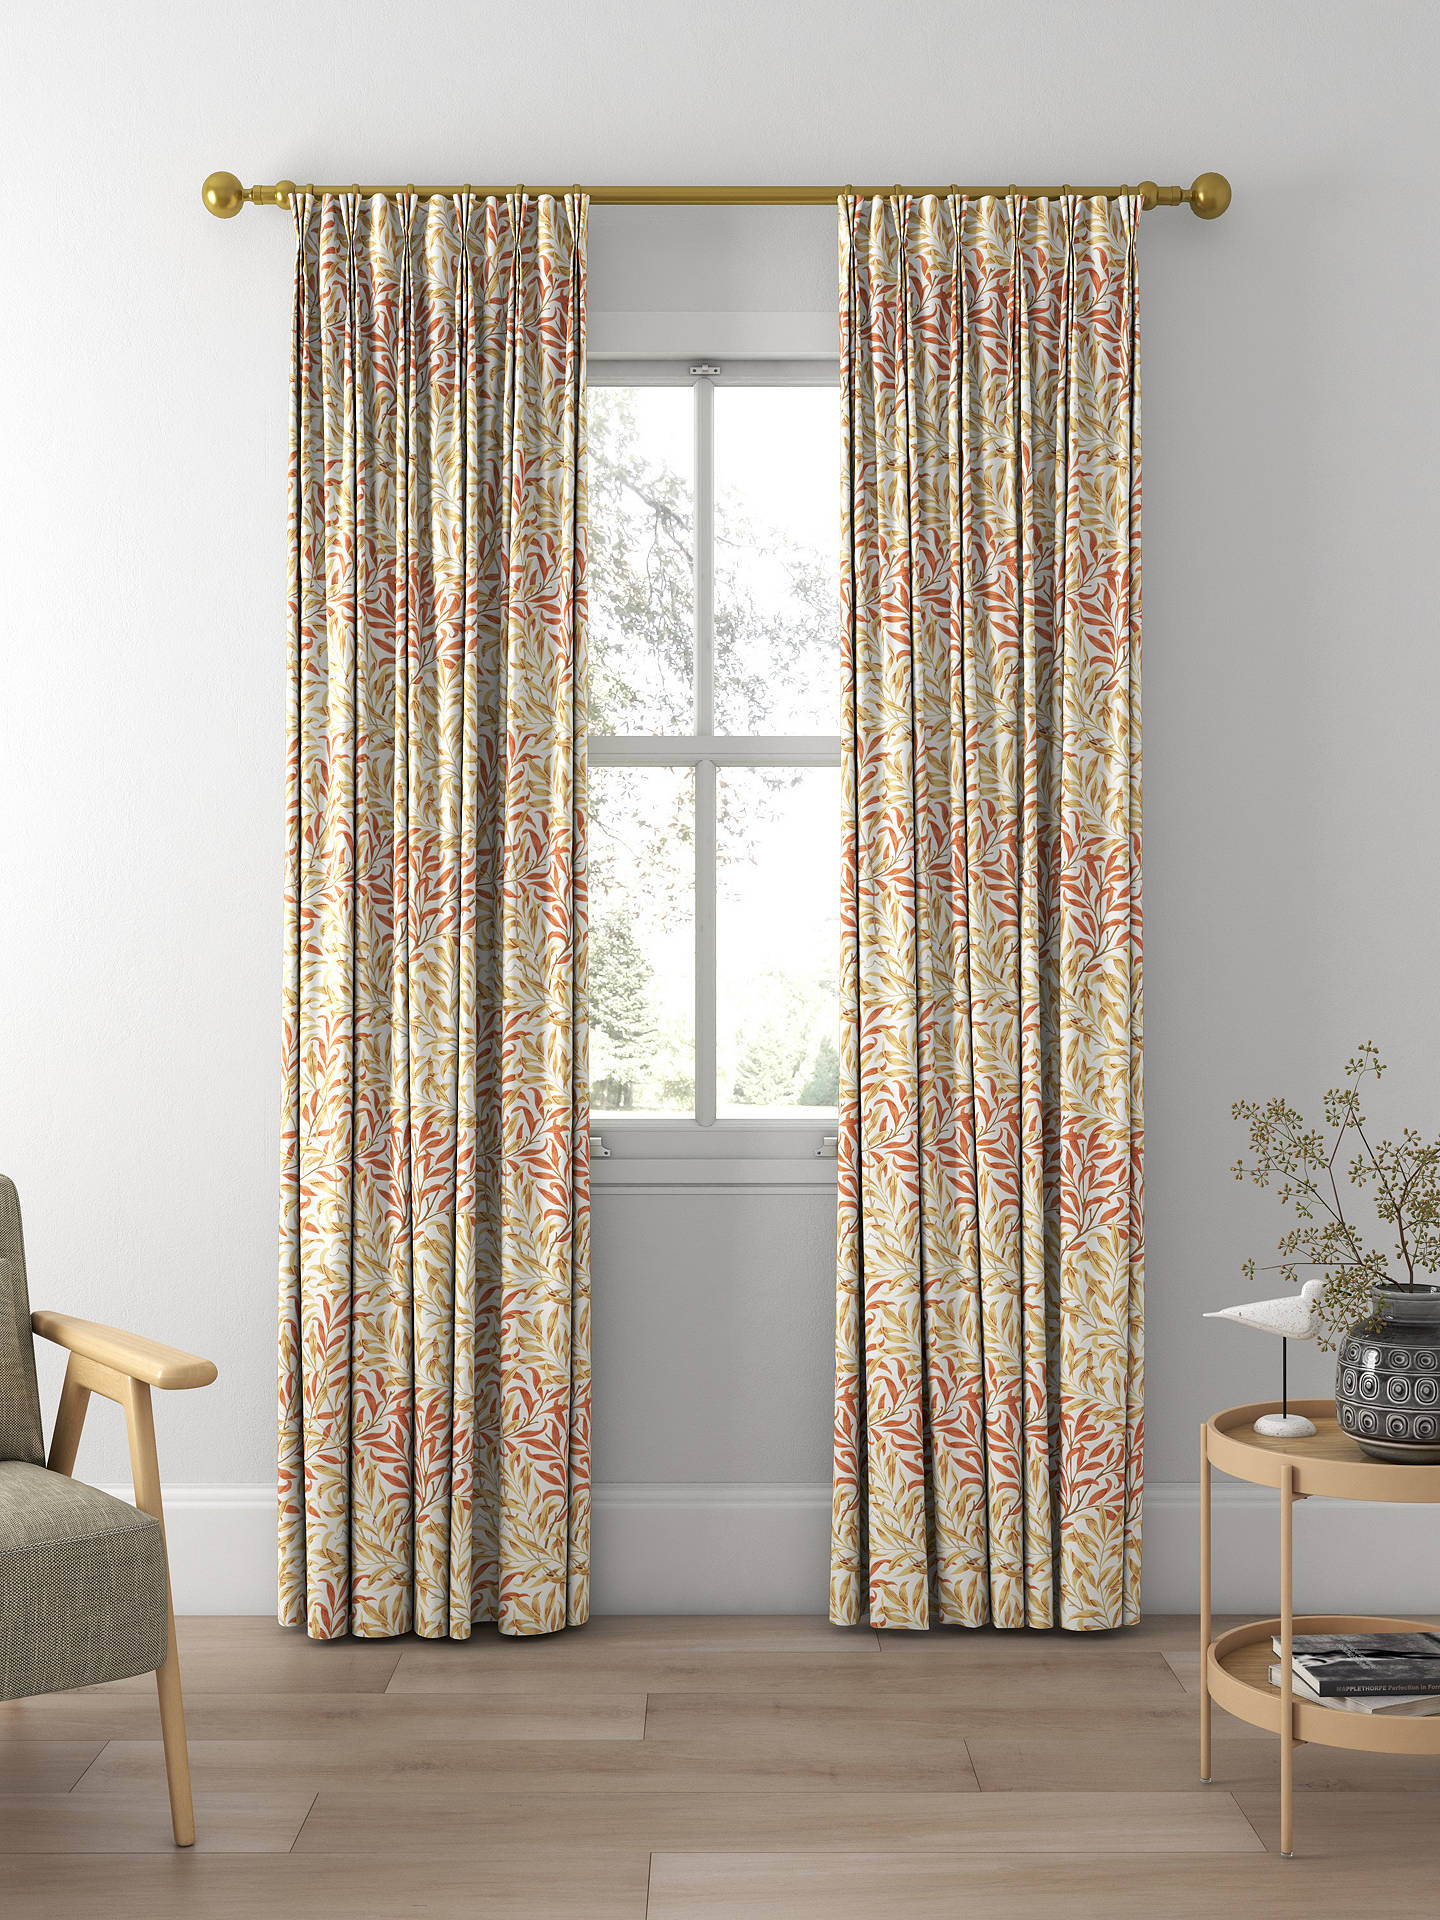 Morris & Co. Willow Boughs Made to Measure Curtains, Russet/Ochre